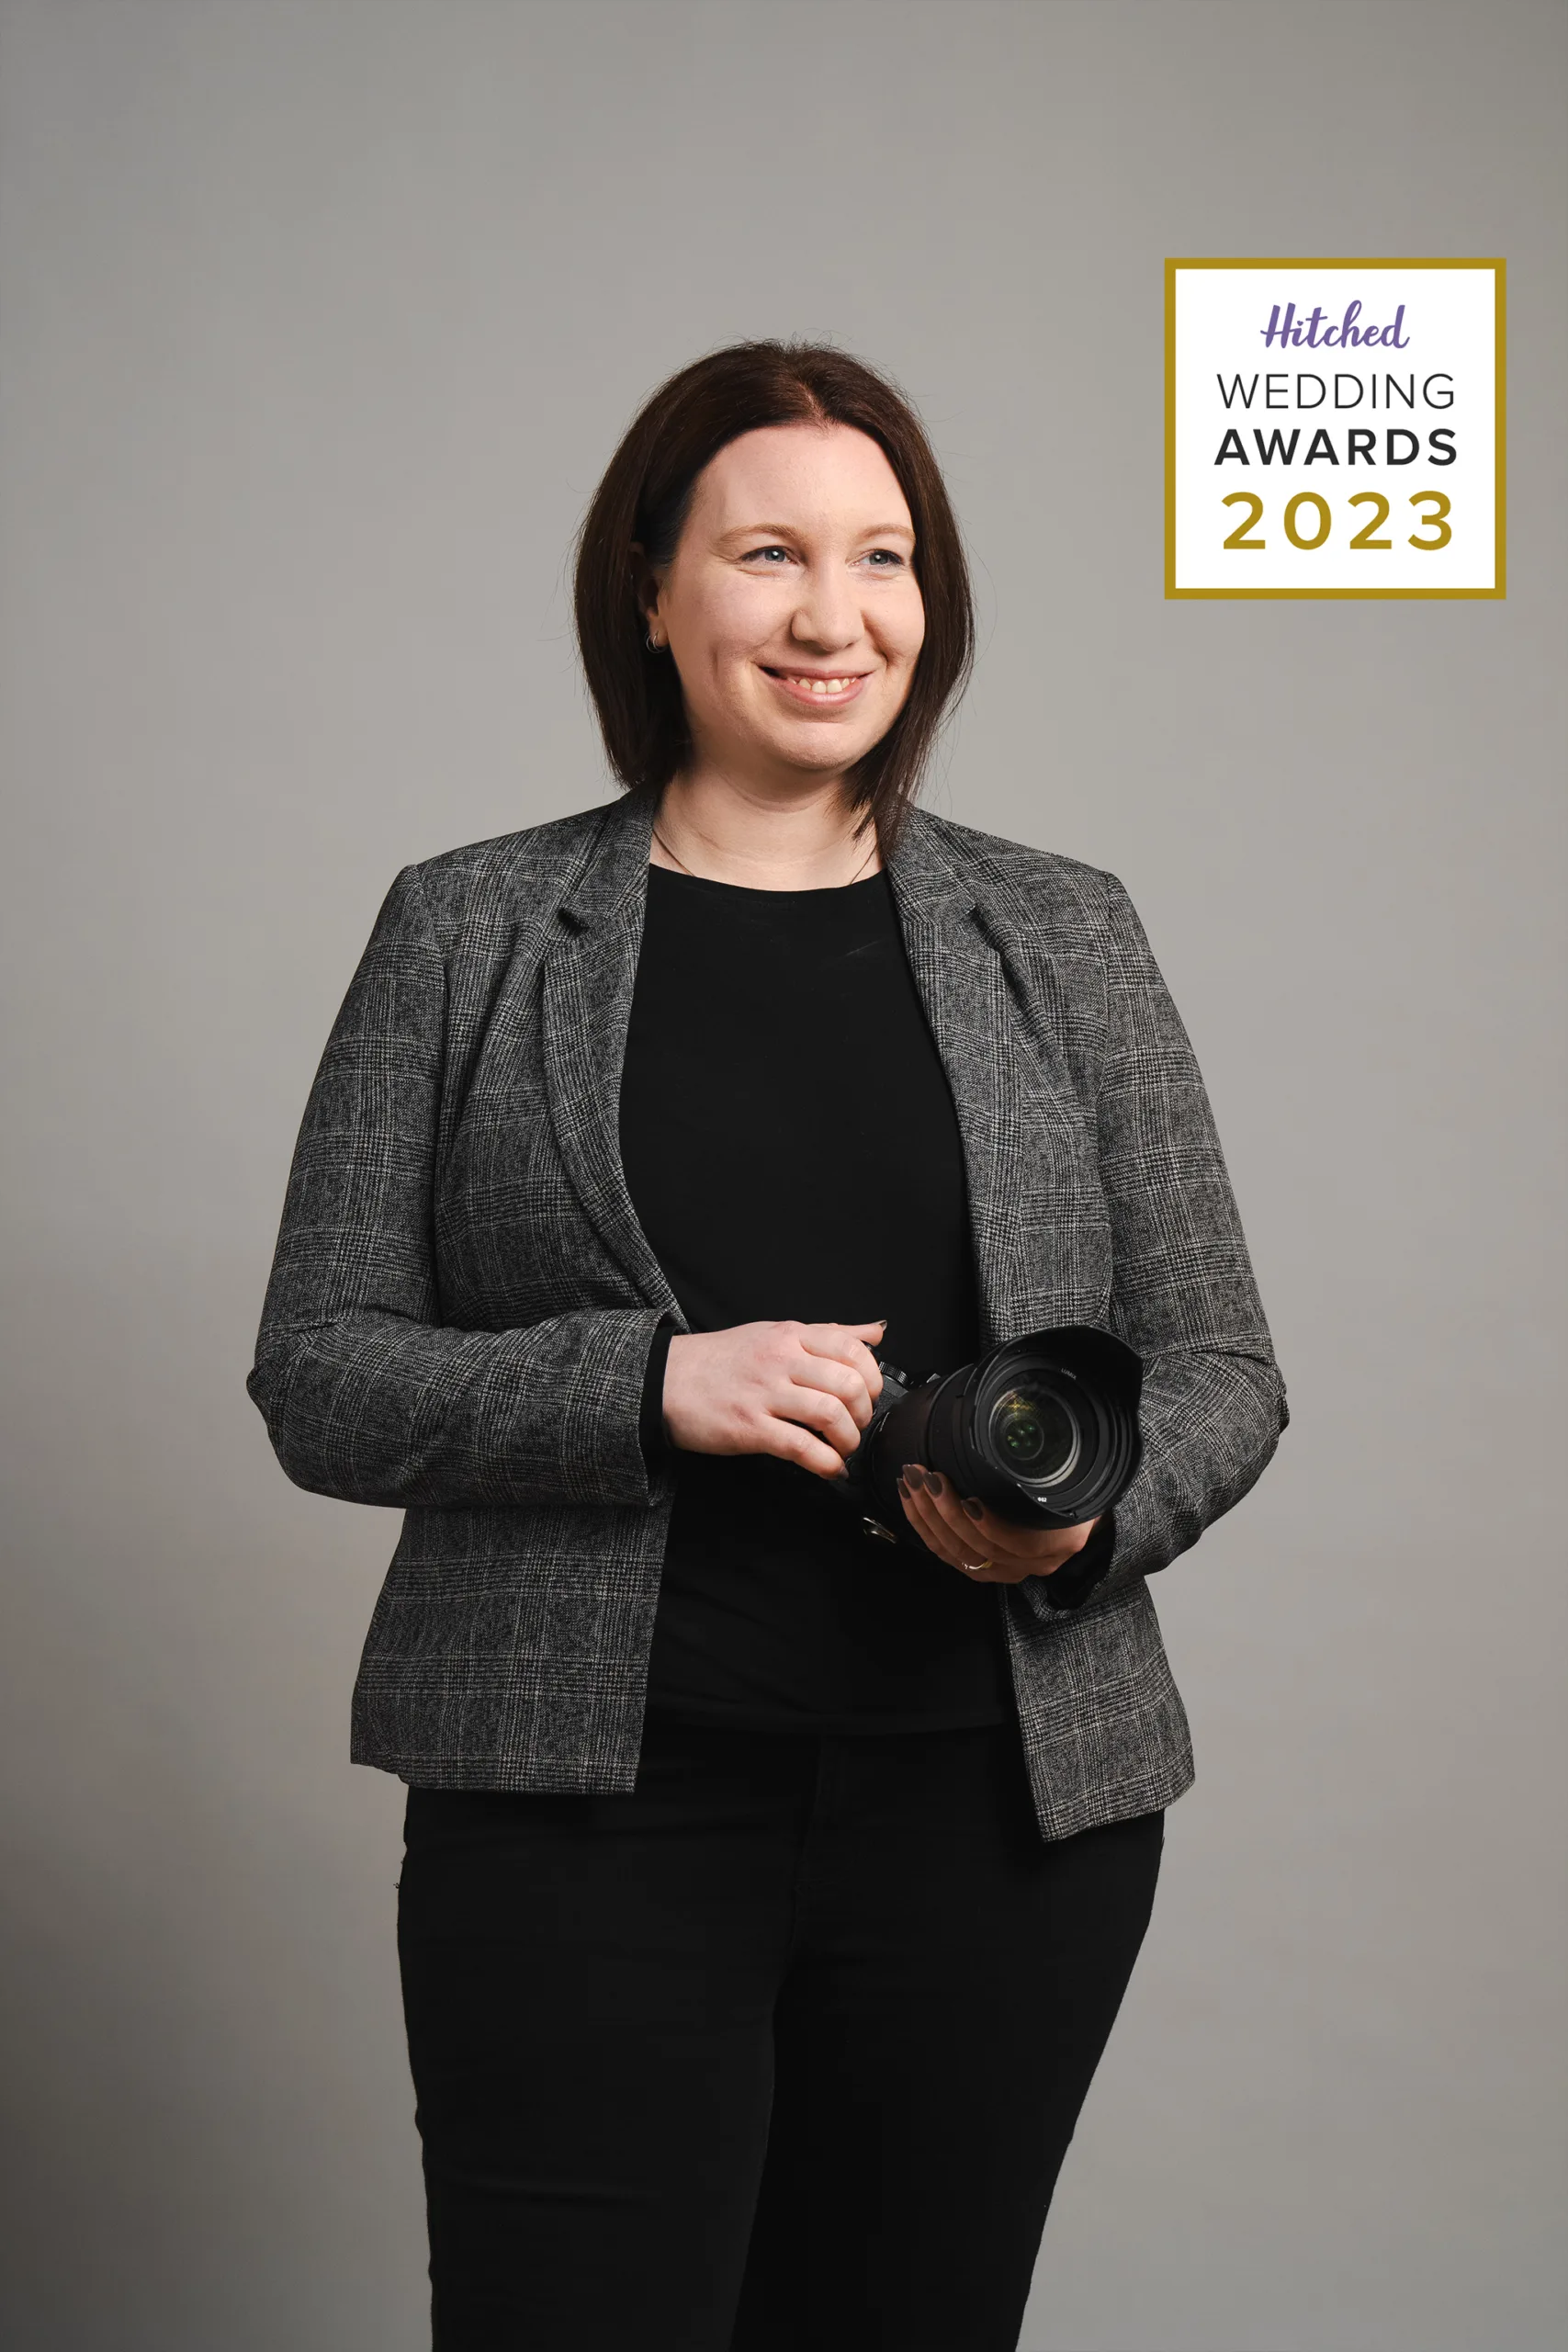 A wedding photographer holding a camera, dressed in a business casual outfit, beams with pride at the 2023 hitched wedding awards, showcasing her award recognition in the industry.